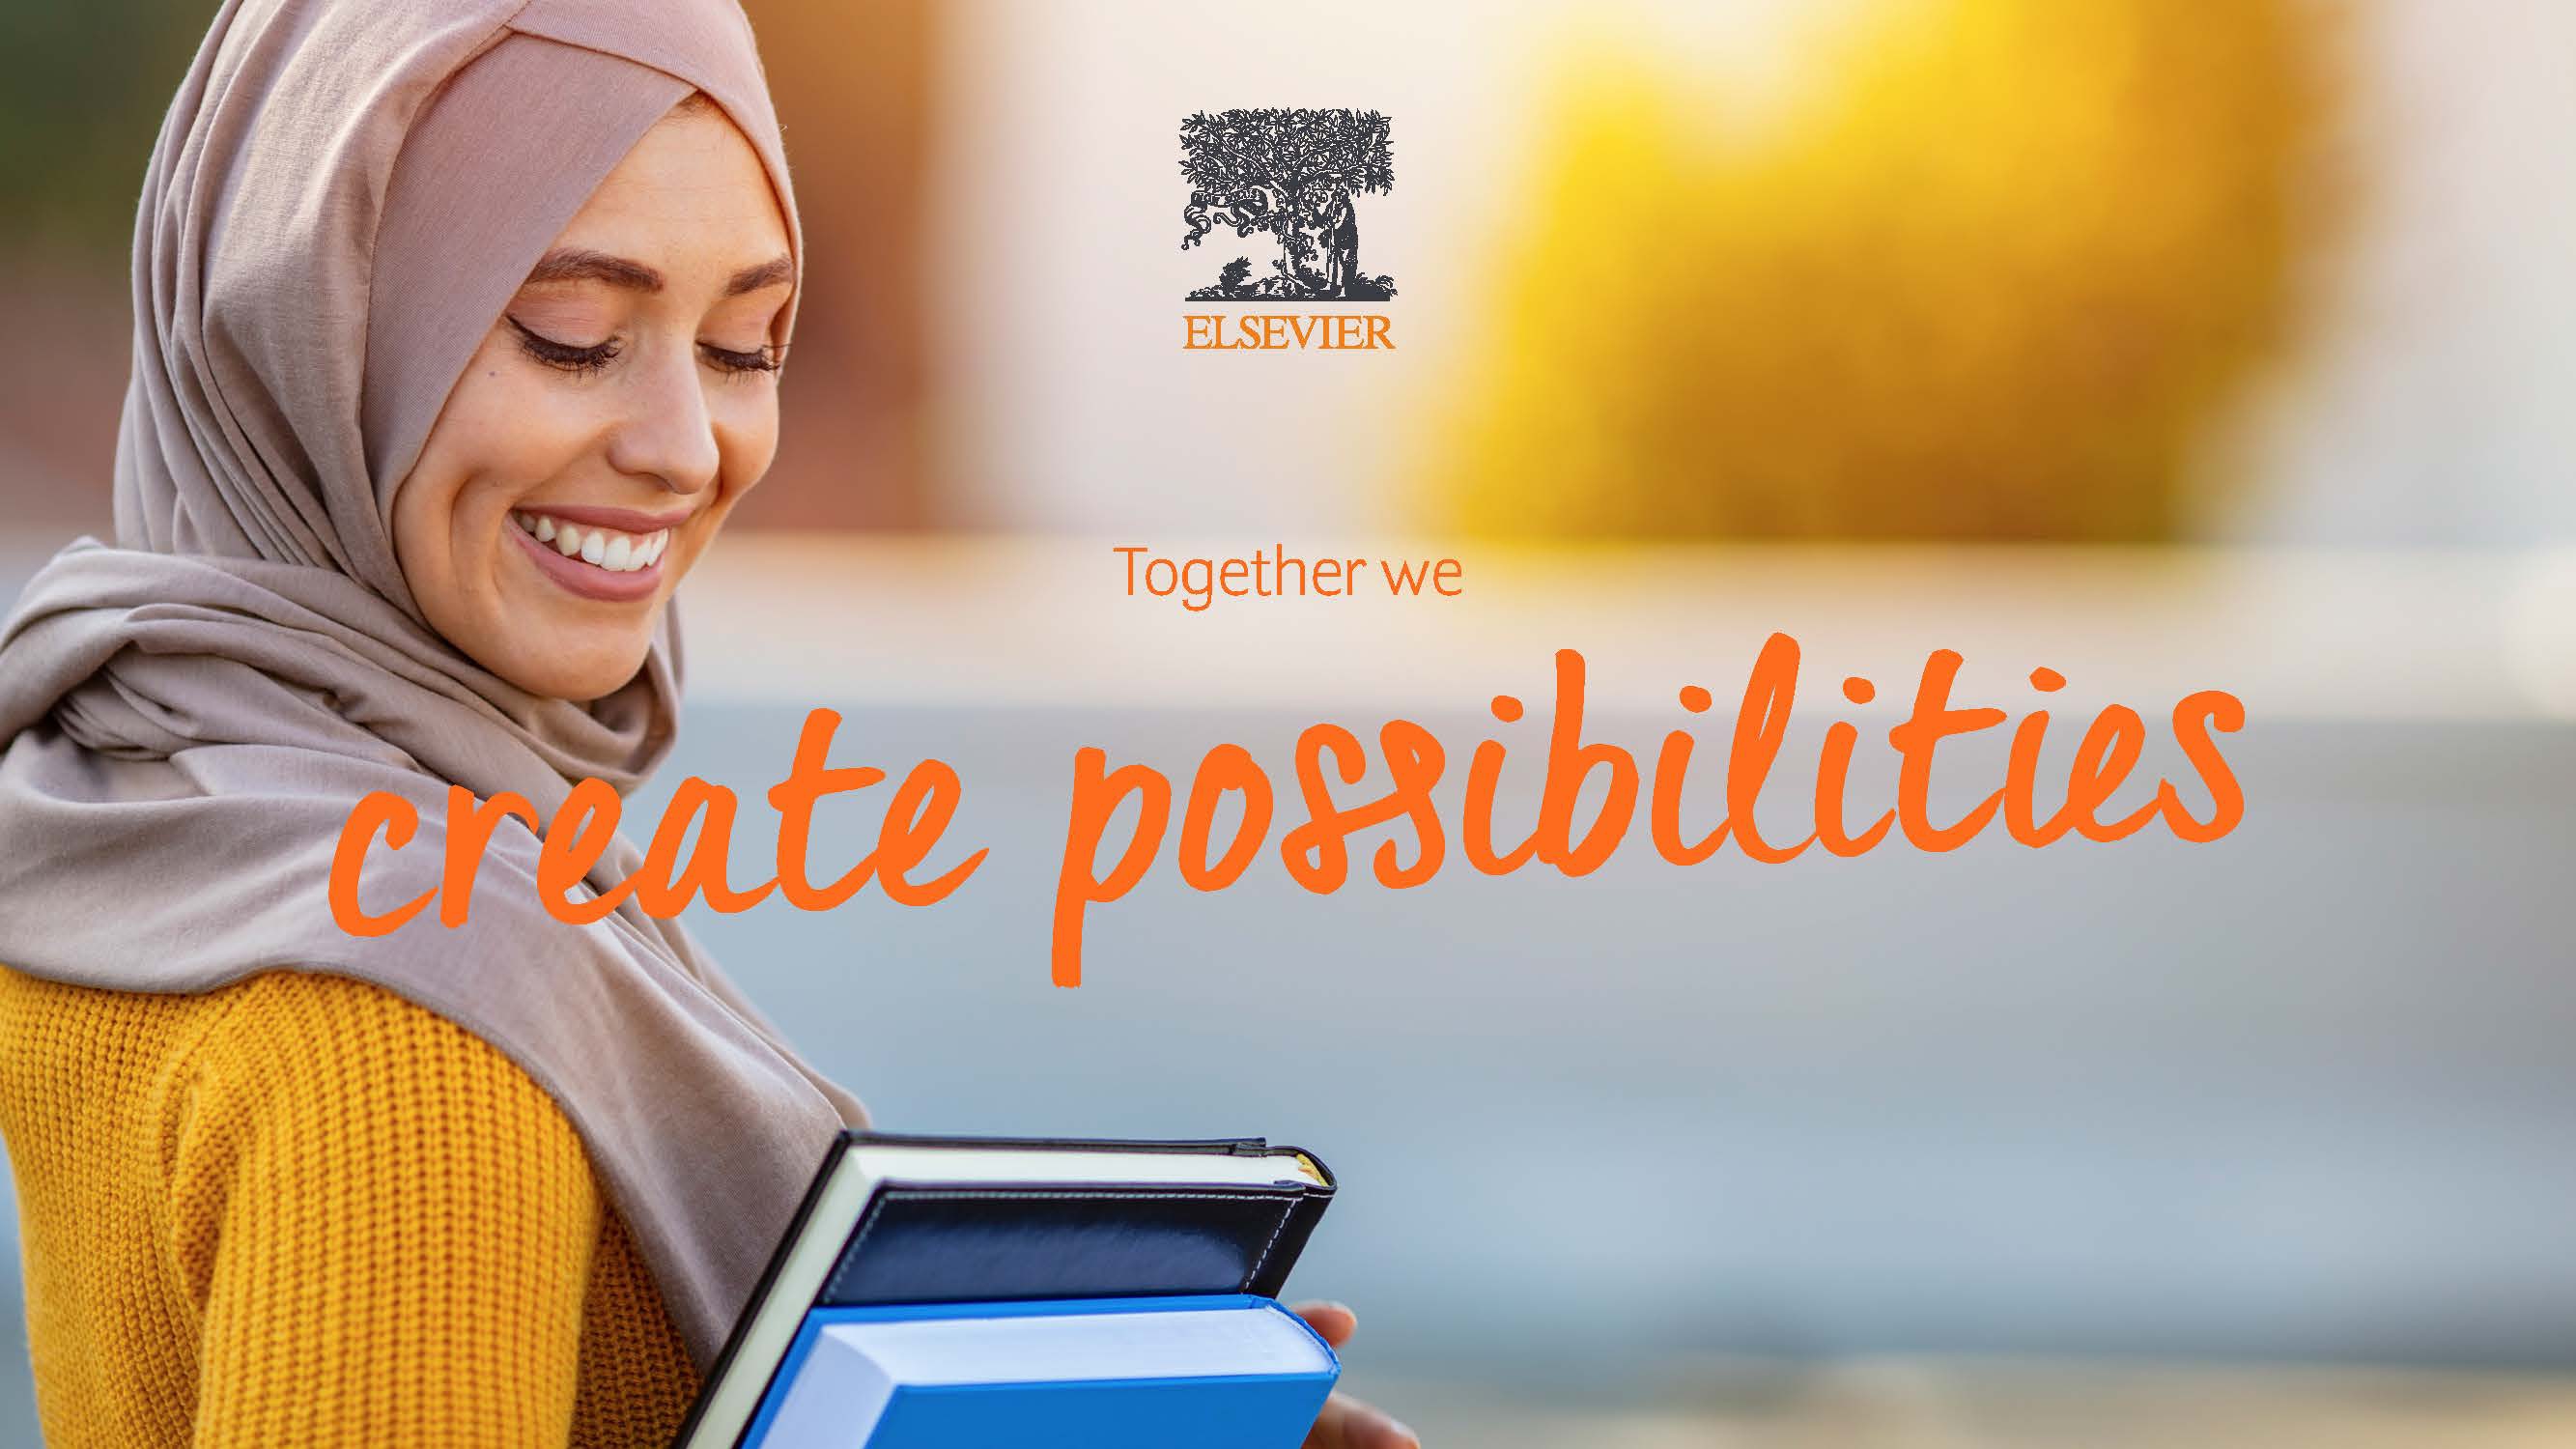 At Elsevier, together we create possibilities